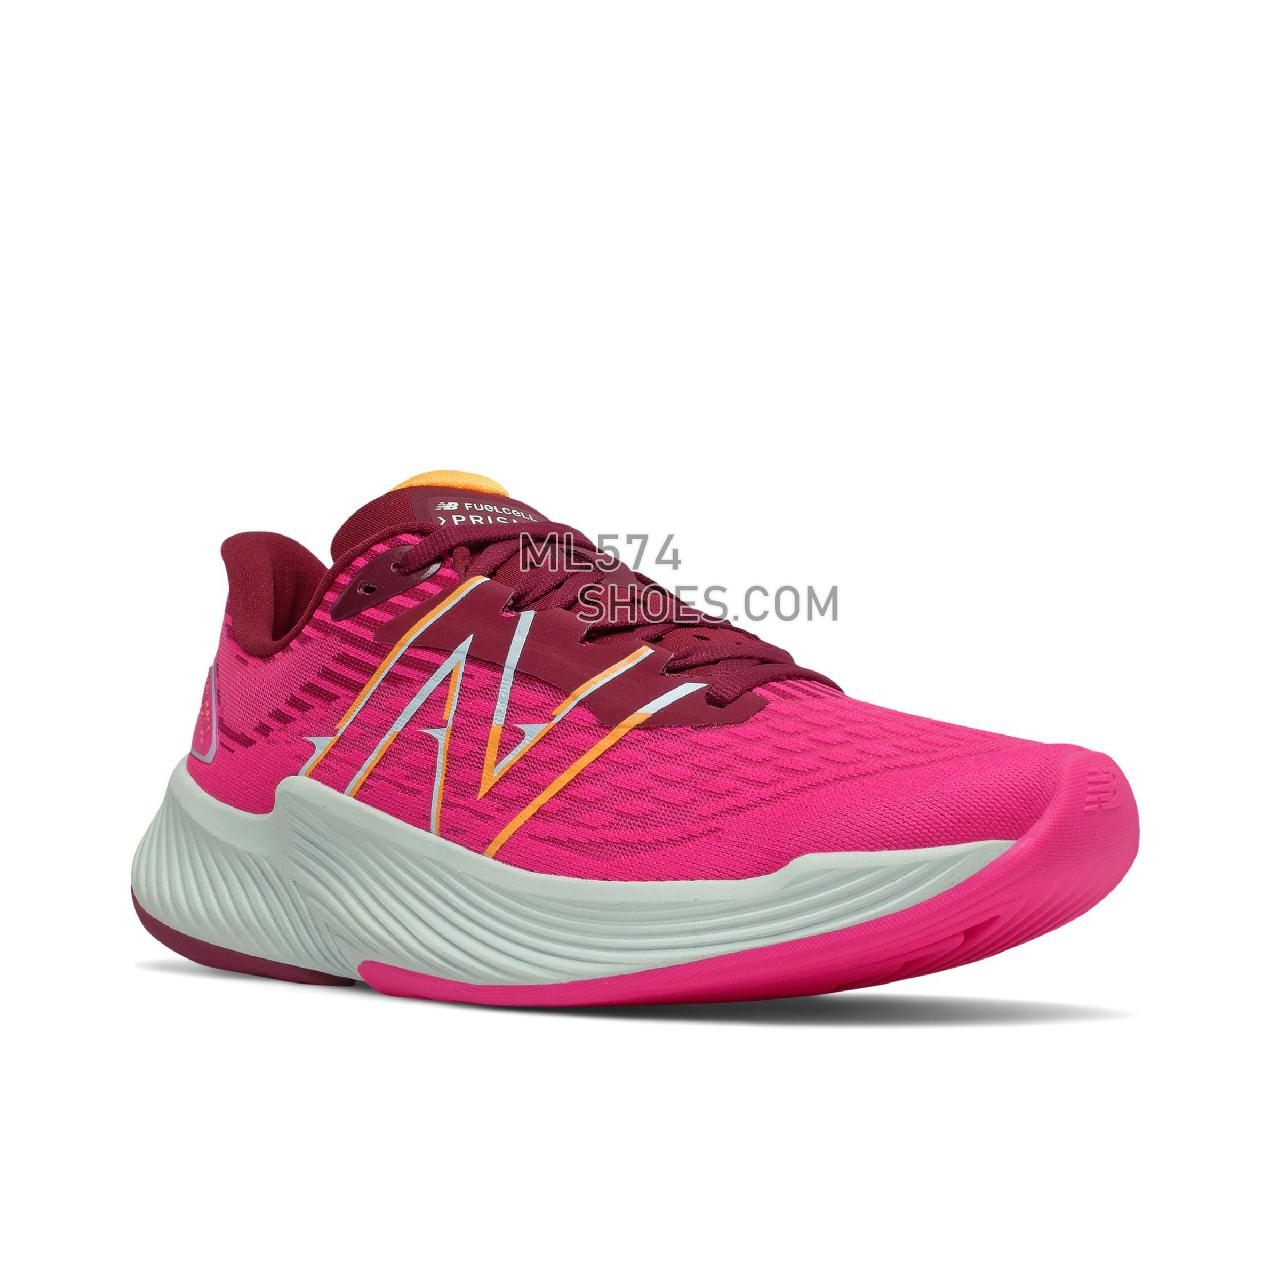 New Balance FuelCell Prism v2 - Women's Stability Running - Pink Glo with Garnet - WFCPZLP2